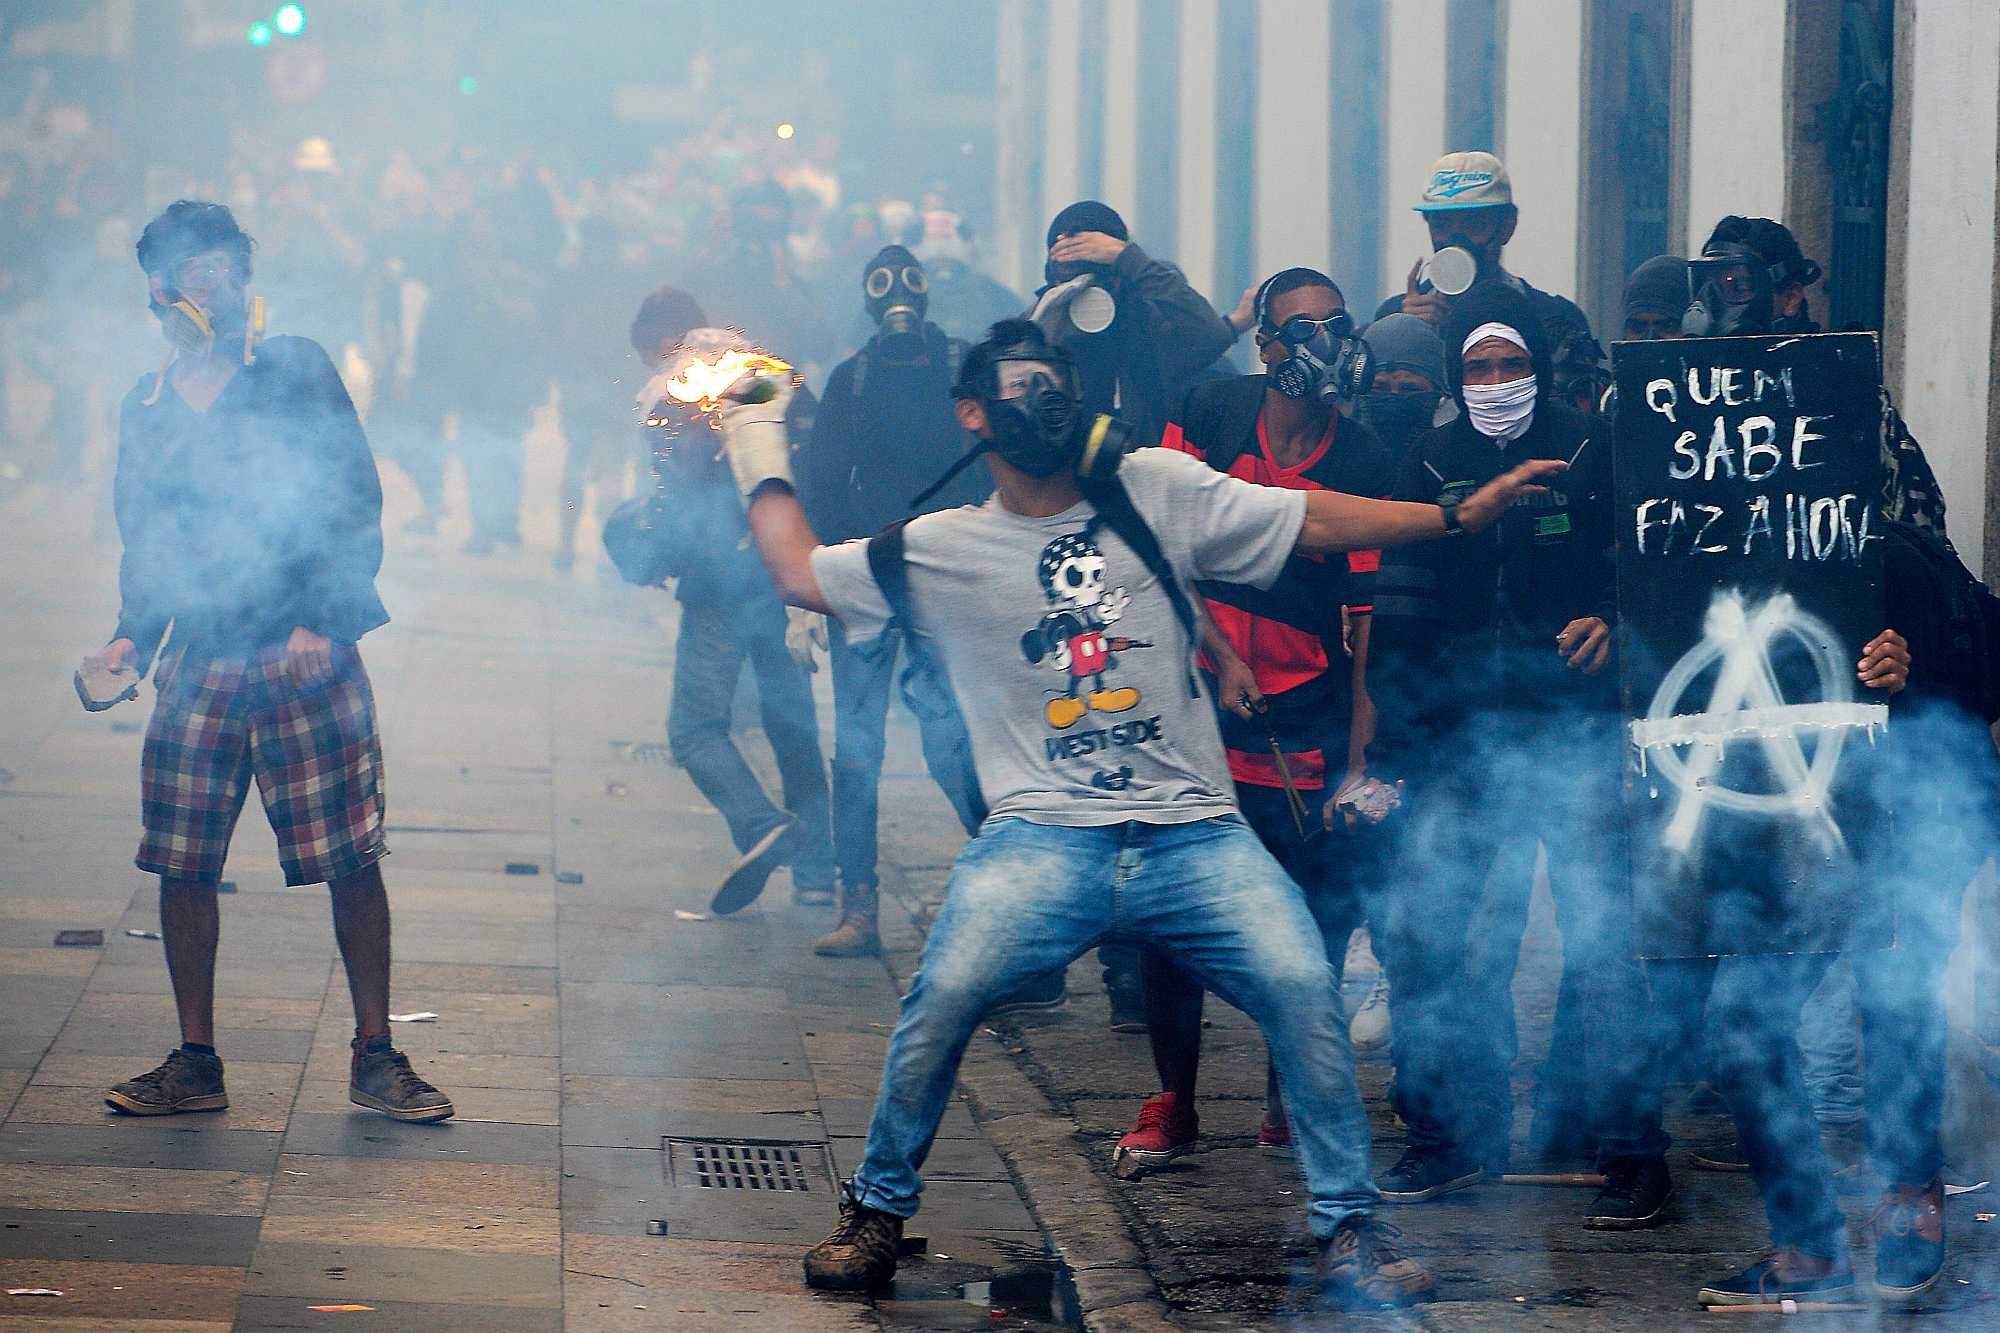 Protesters clash with police during Brazil's general strike - Tomaz Silva/ABr